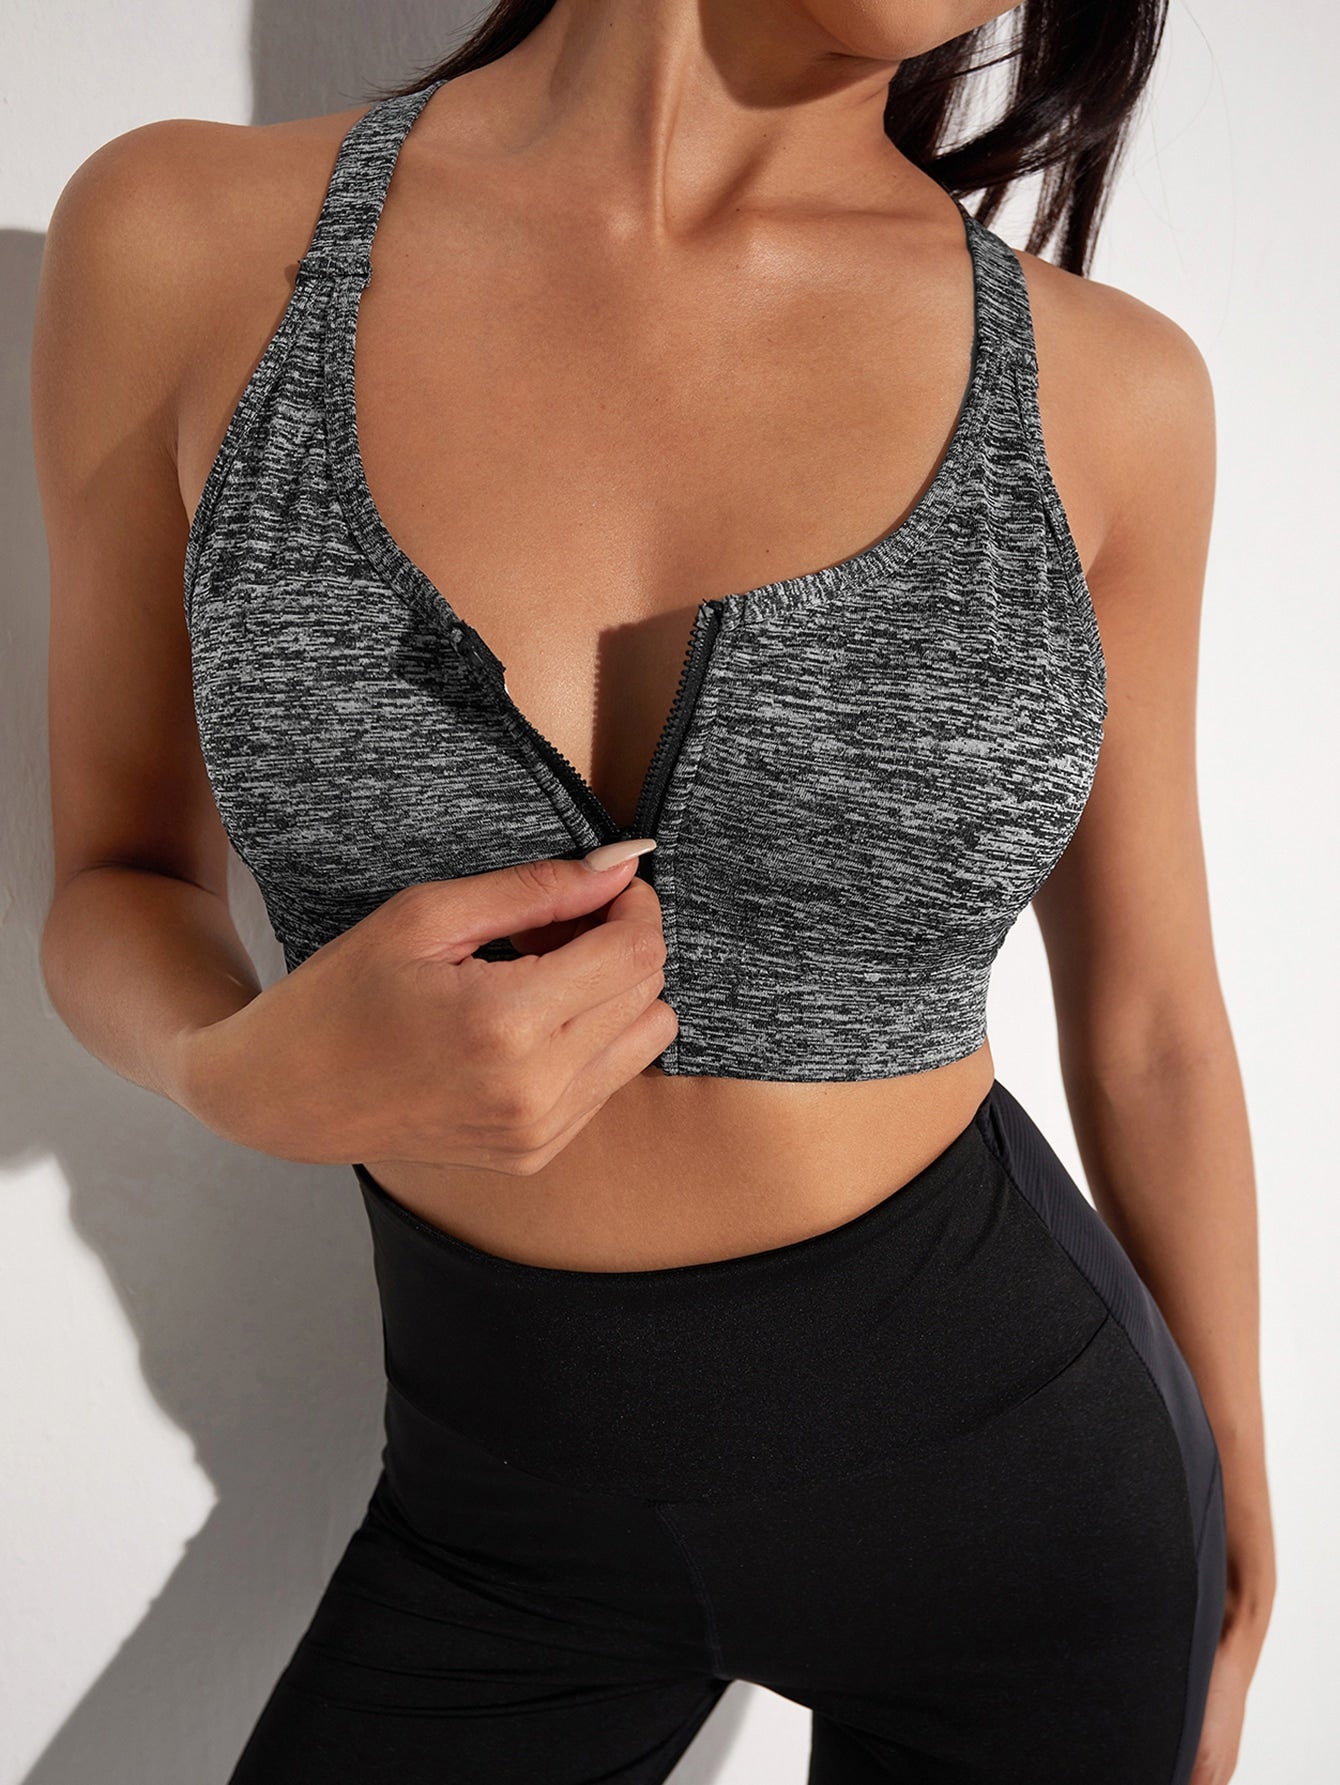 Yoga Bra - Breathable Zip Front Sports and yoga Bra - Personal Hour 